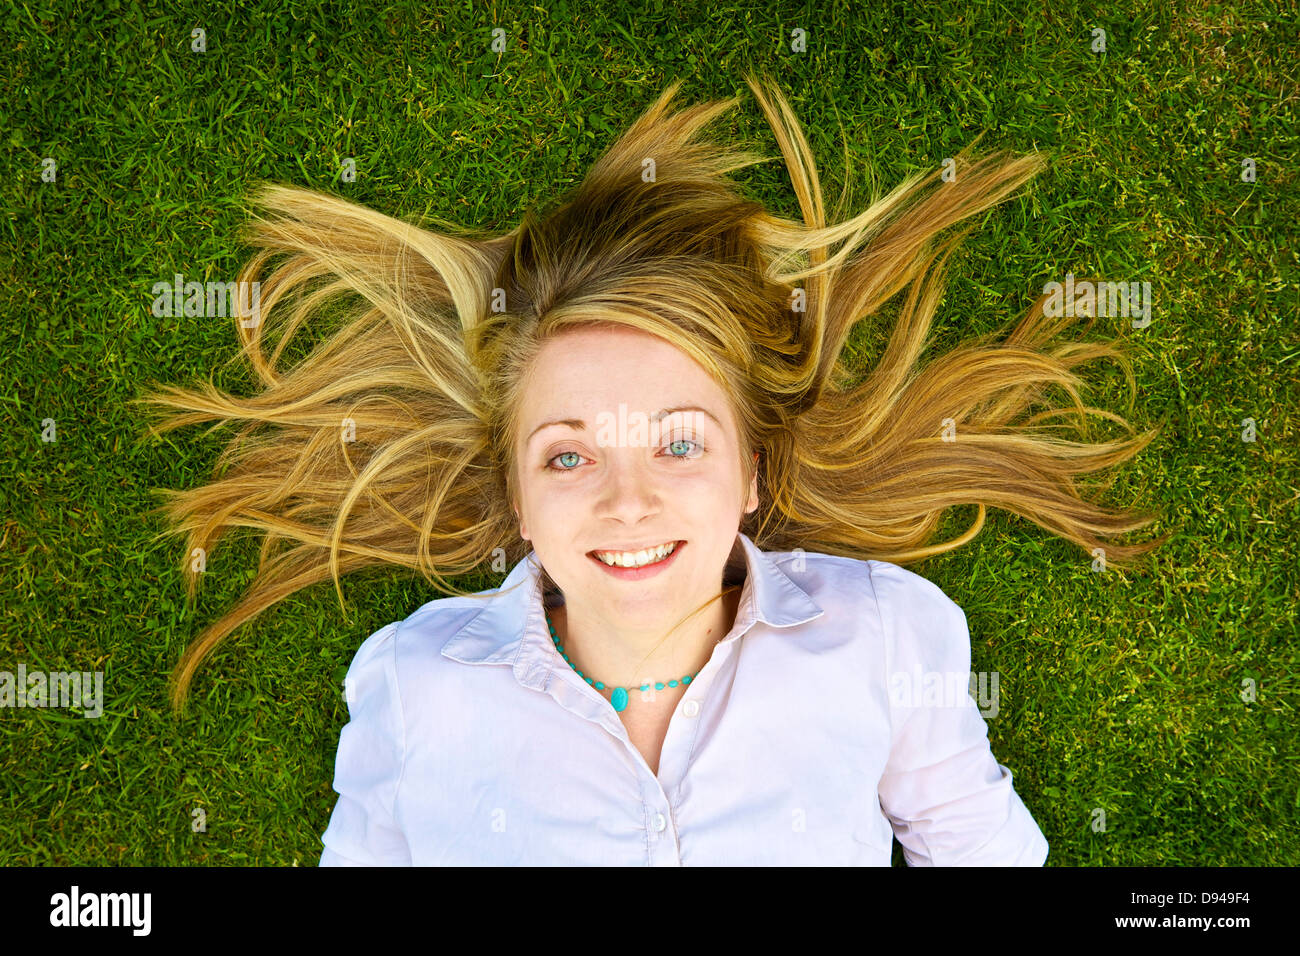 Young woman lying back on grass smiling upwards at camera Stock Photo